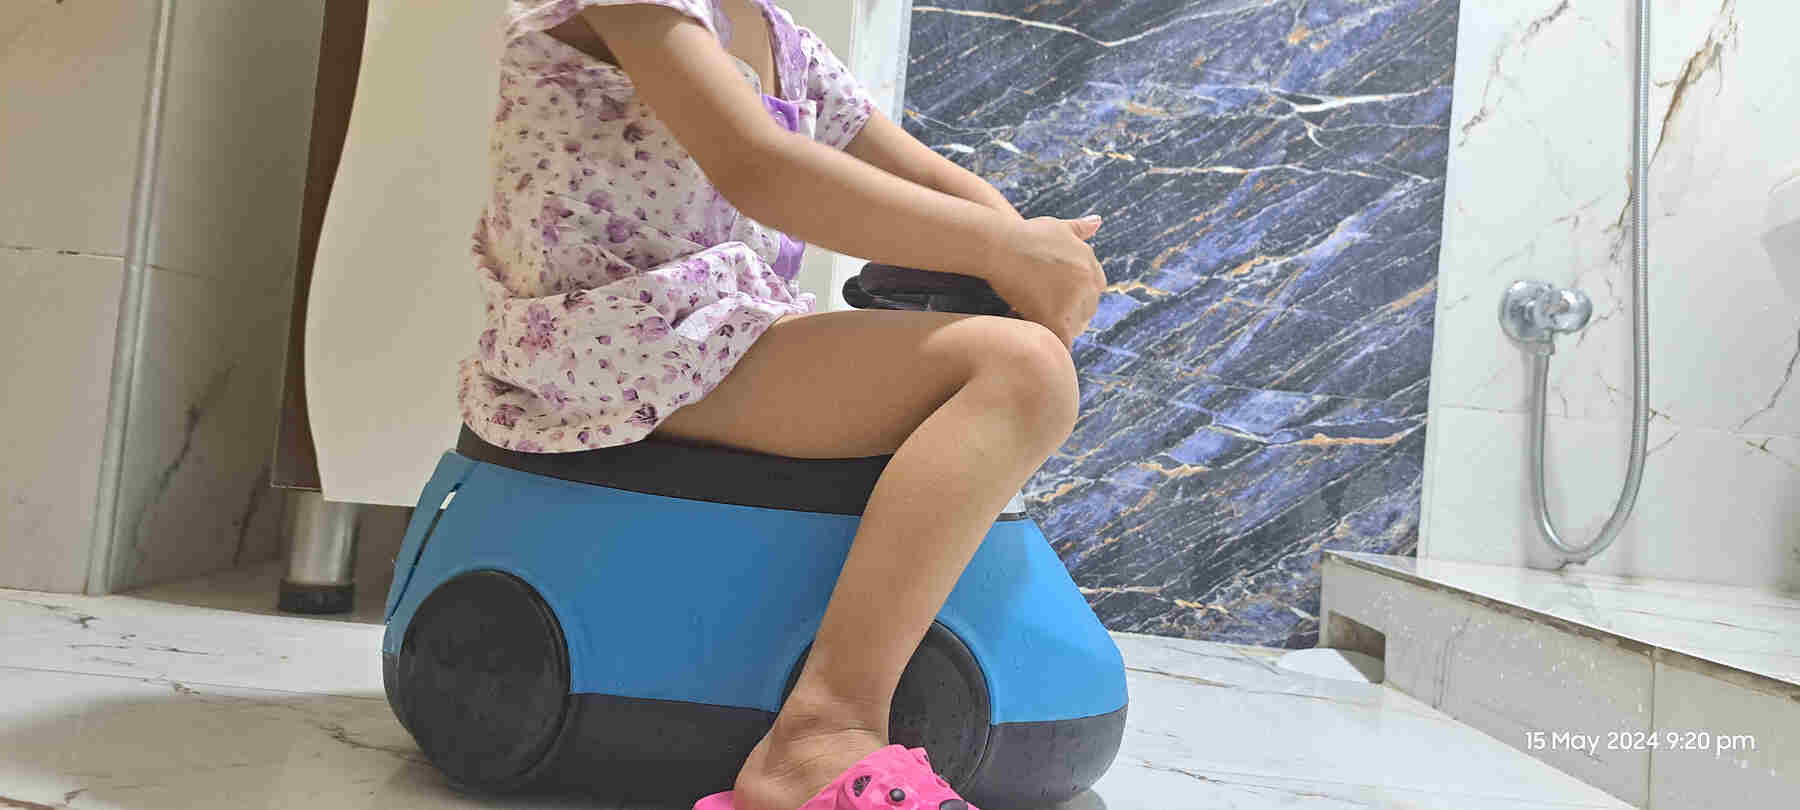 How to find best potty seats for toddlers